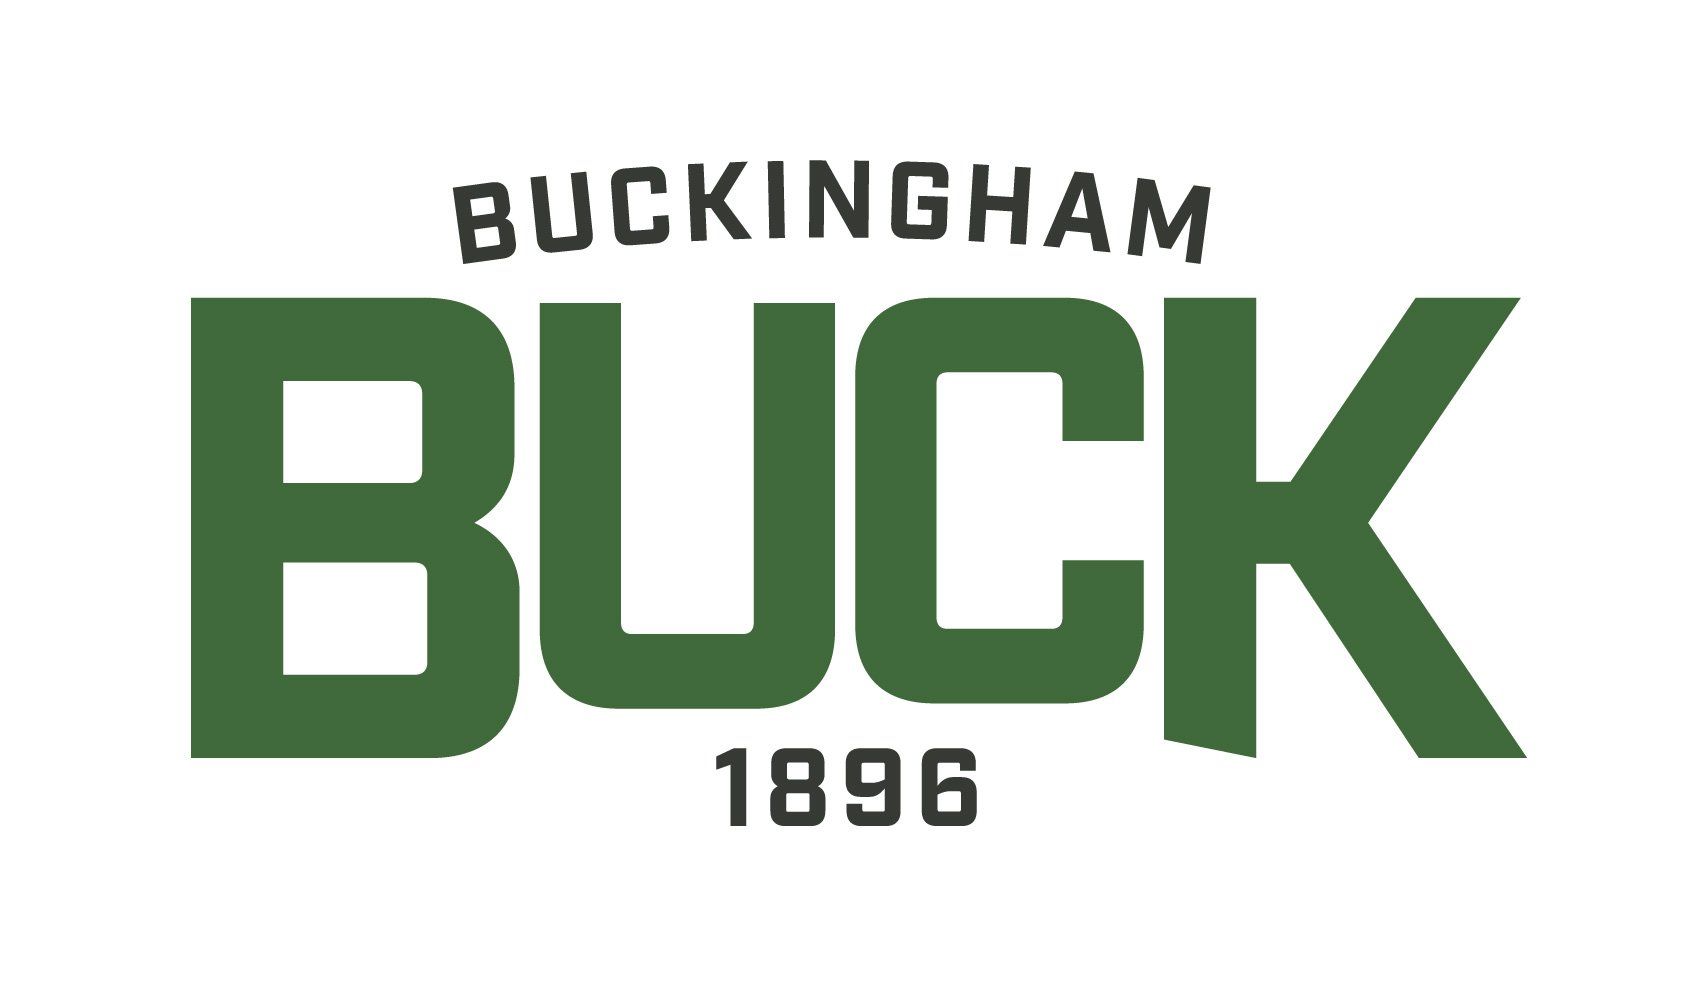 Buckingham Manufacturing serving the tree service industry